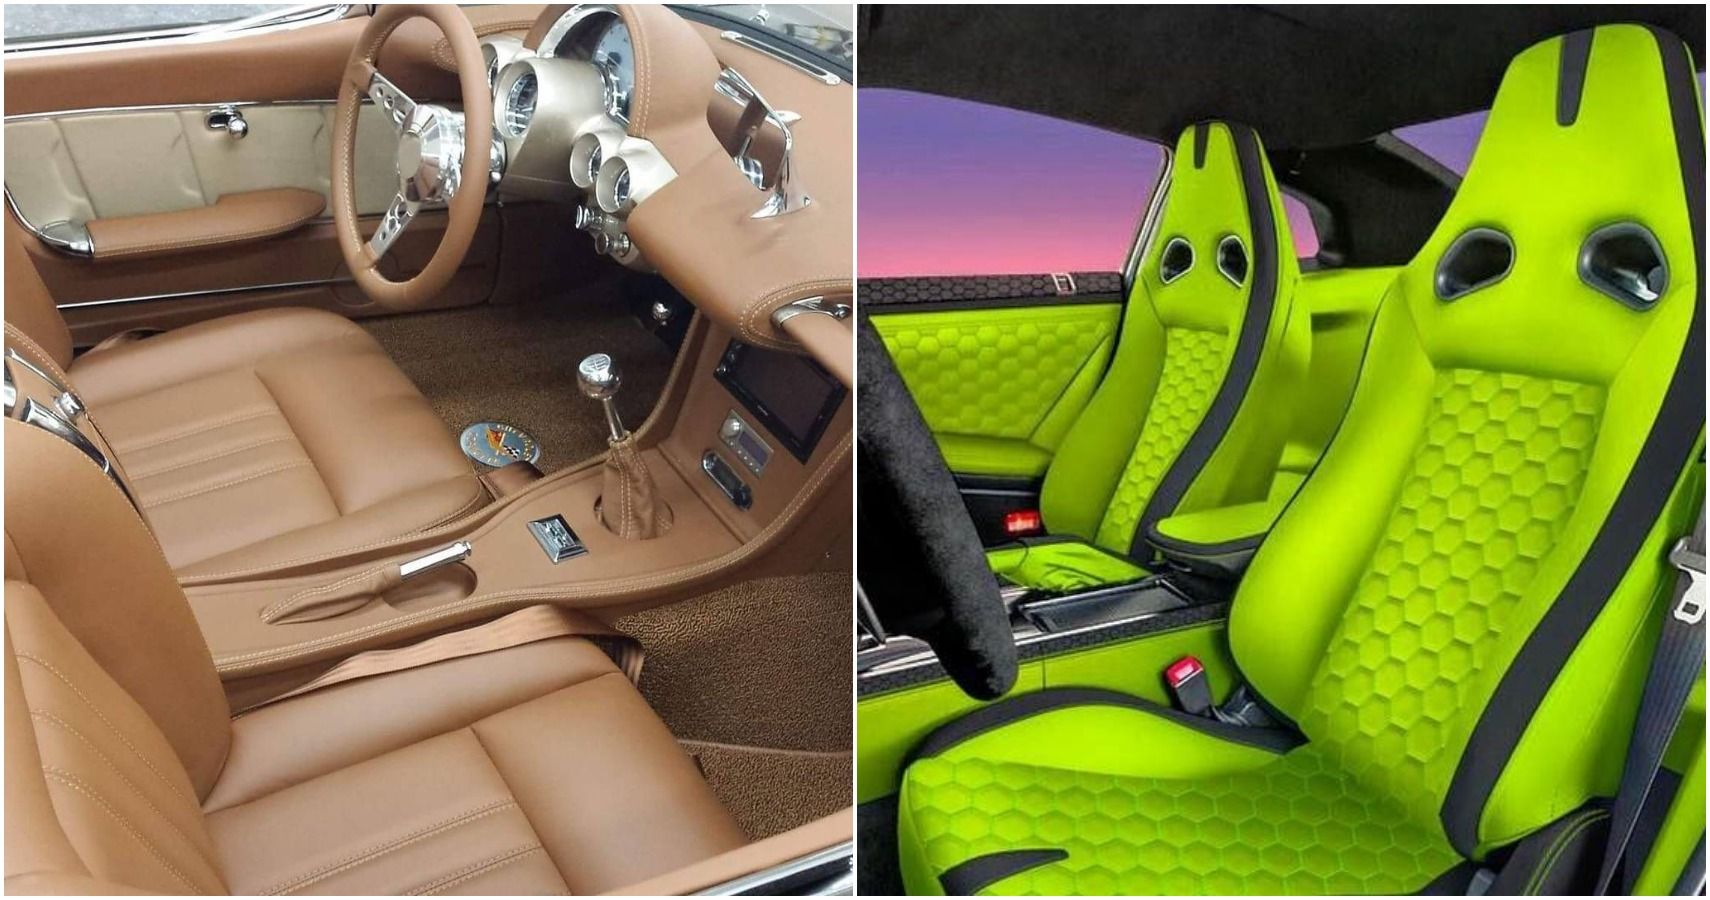 10 Custom Car Interiors That Are Absolutely Amazing (5 That Make Us Sick)